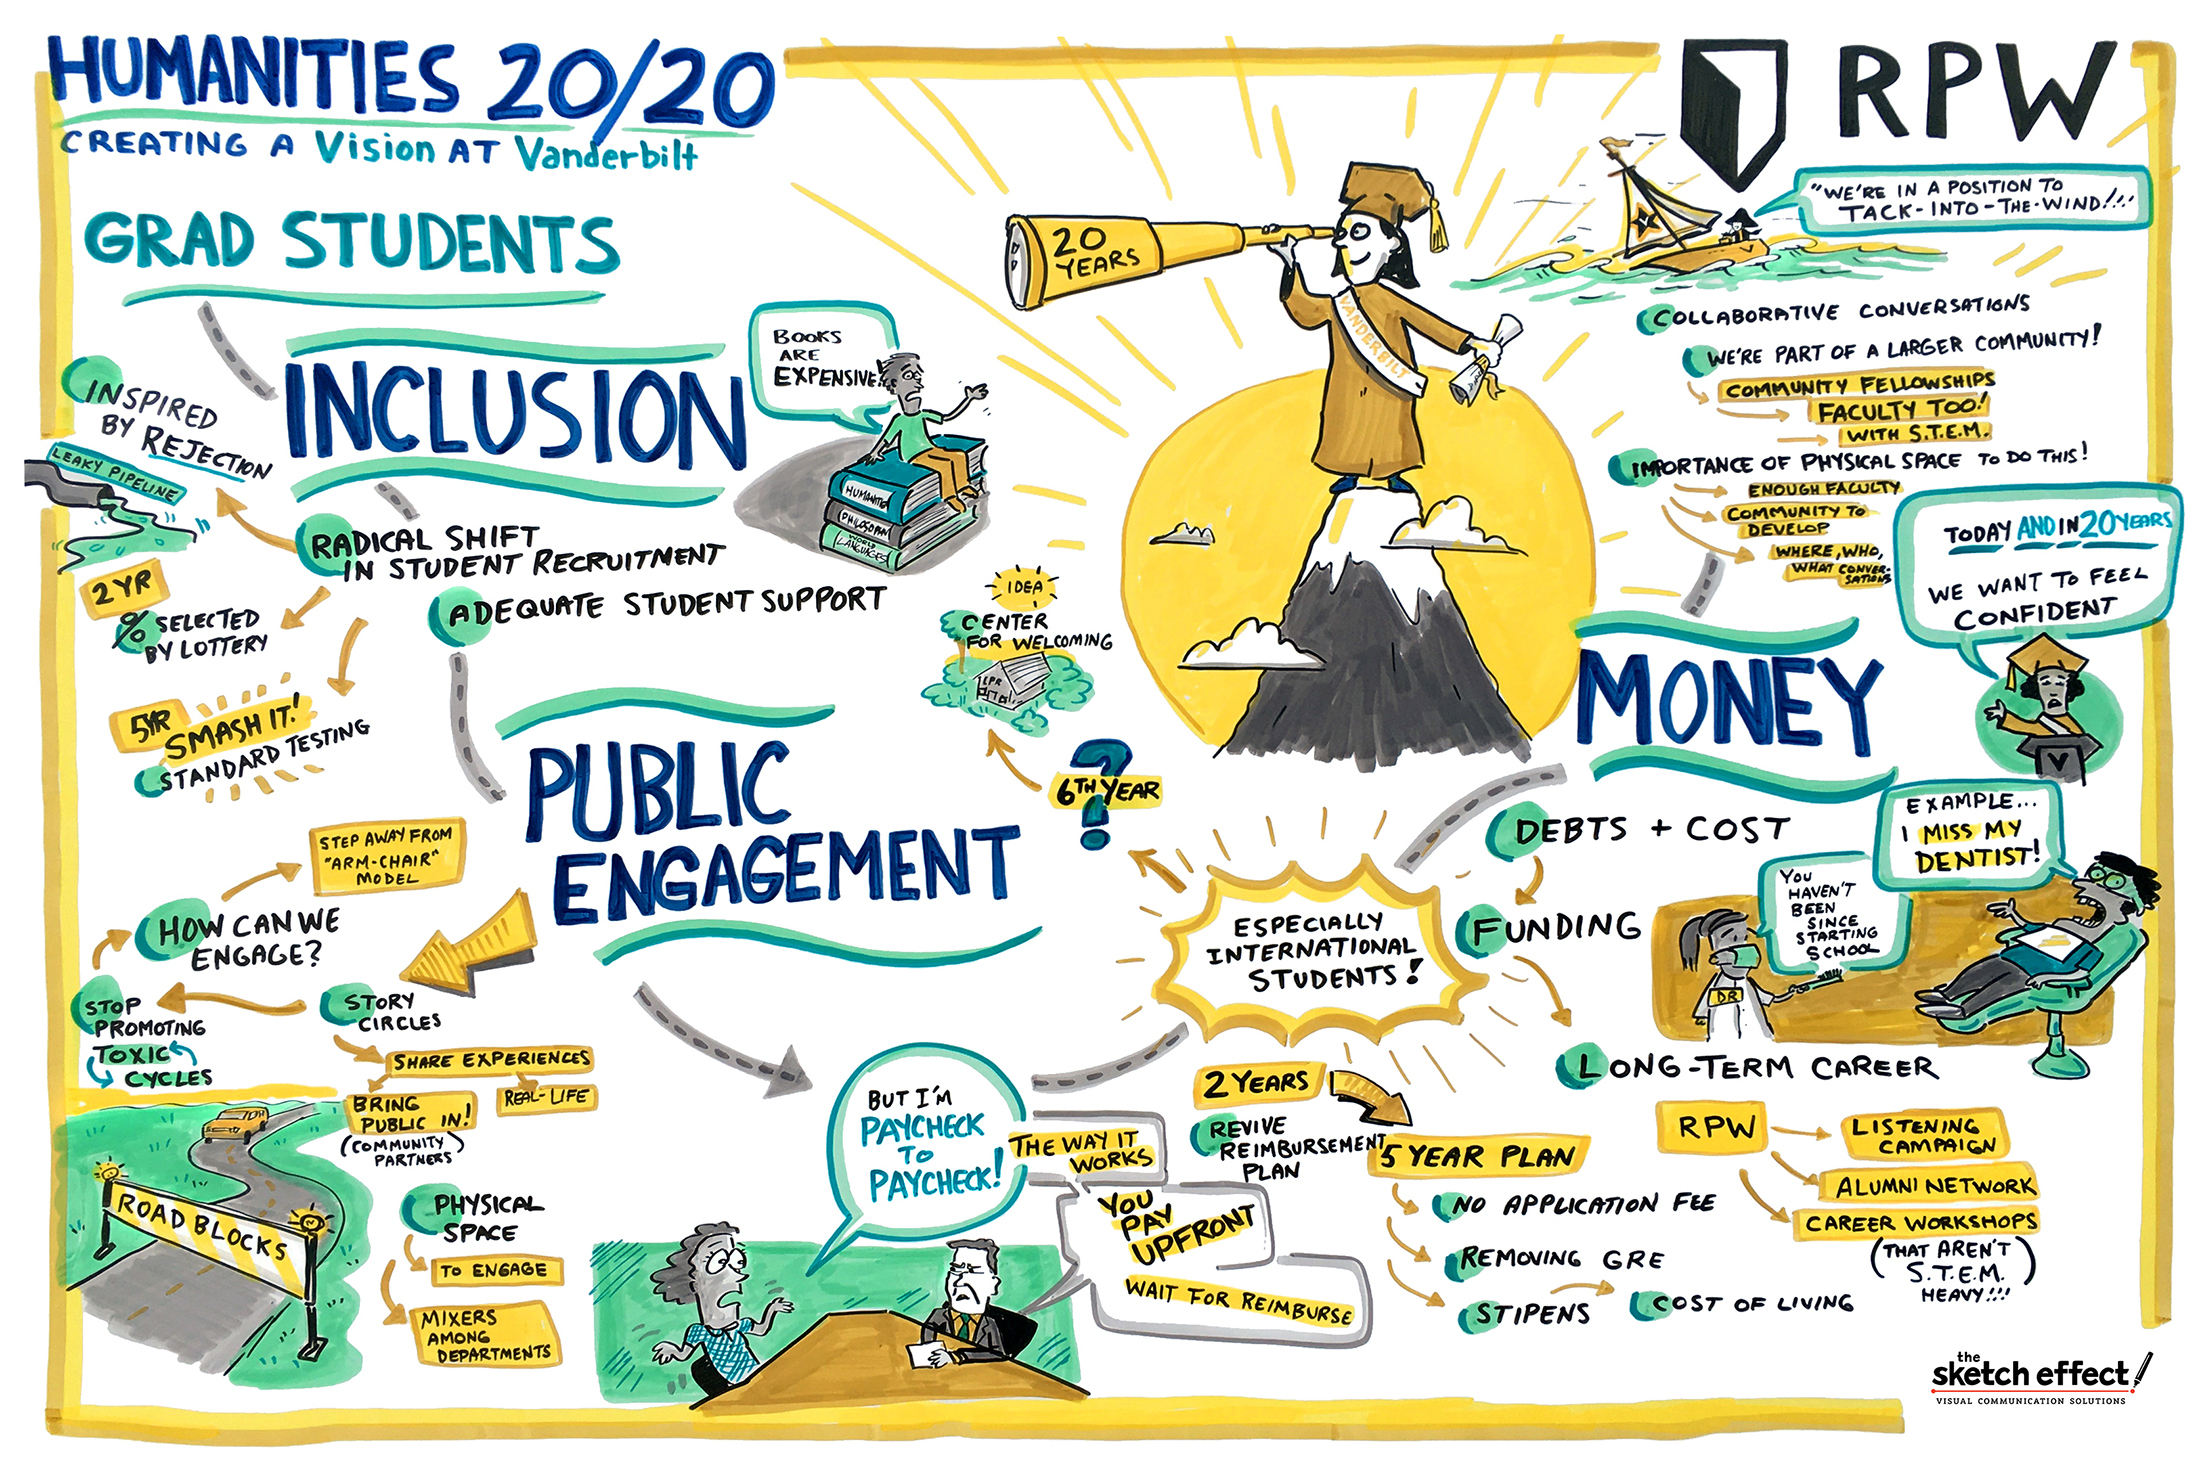 Graphic recording by The Sketch Effect titled "Humanities 20/20: Creating a vision at Vanderbilt"